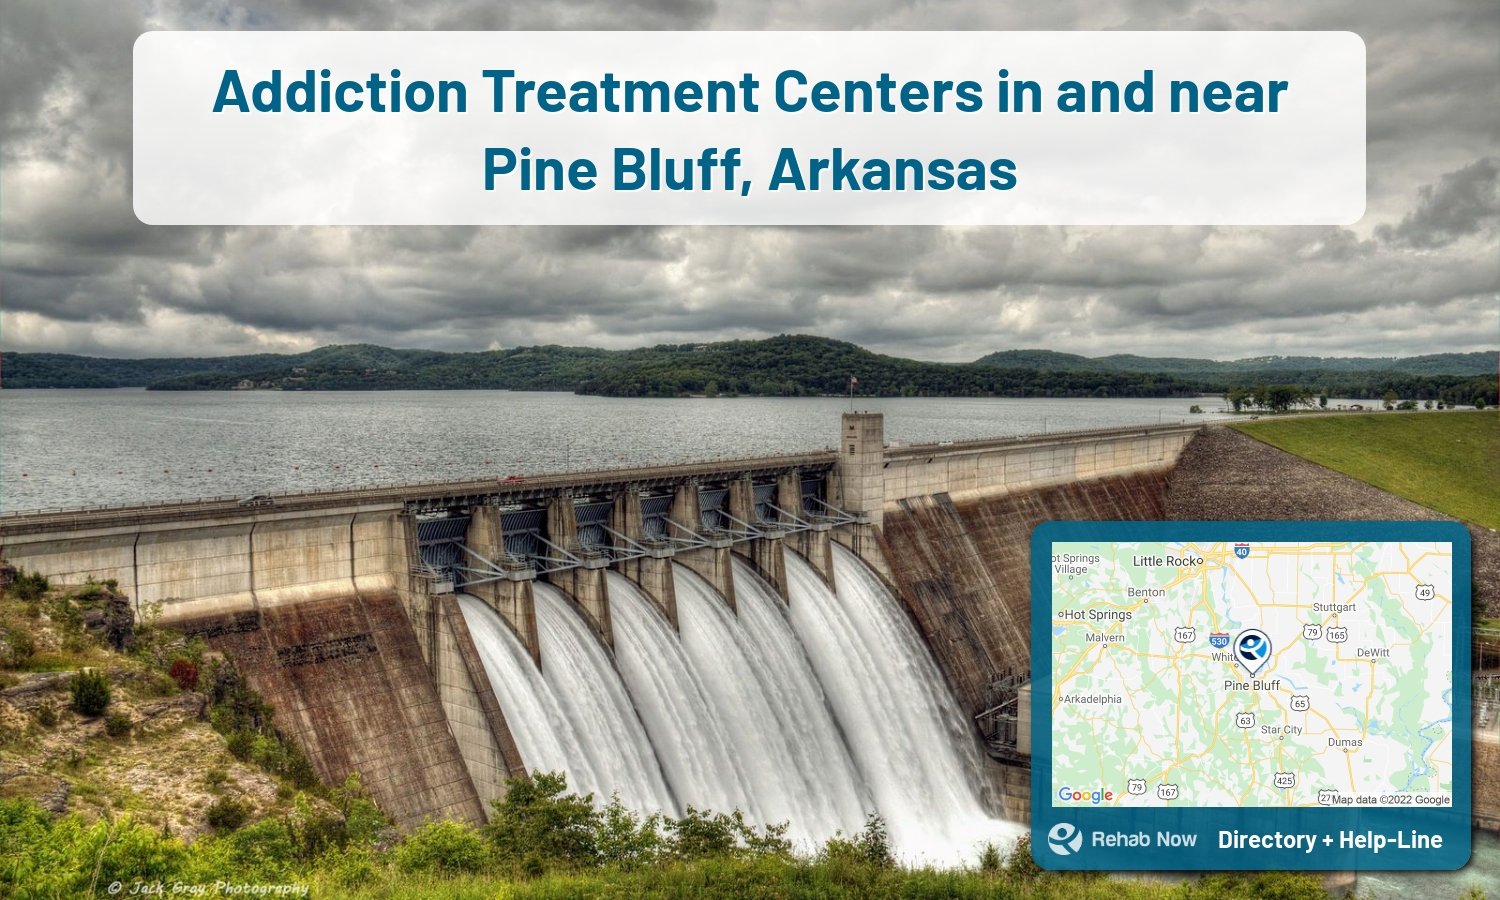 View options, availability, treatment methods, and more, for drug rehab and alcohol treatment in Pine Bluff, Arkansas